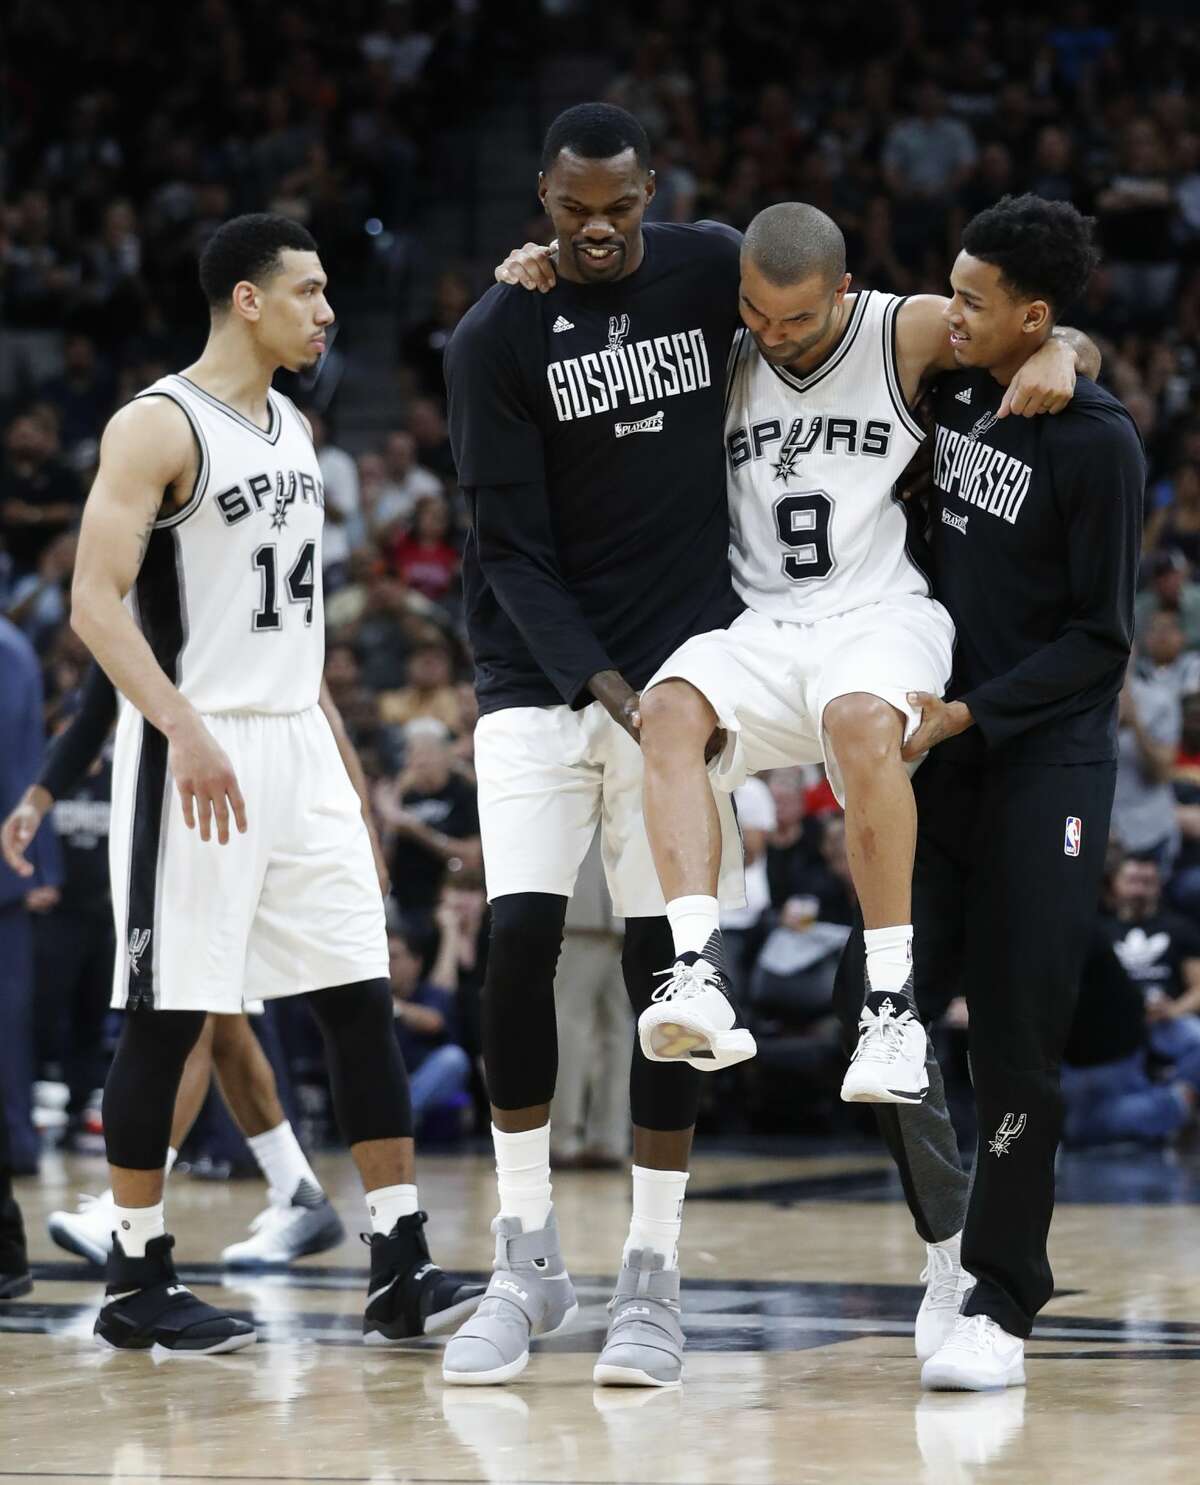 San Antonio Spurs guard Tony Parker (9) is carried off the court after being injured during the second half of Game 2 of the second-round of the Western Conference NBA playoffs at AT&T Center, Wednesday, May 3, 2017, in San Antonio. ( Karen Warren / Houston Chronicle )